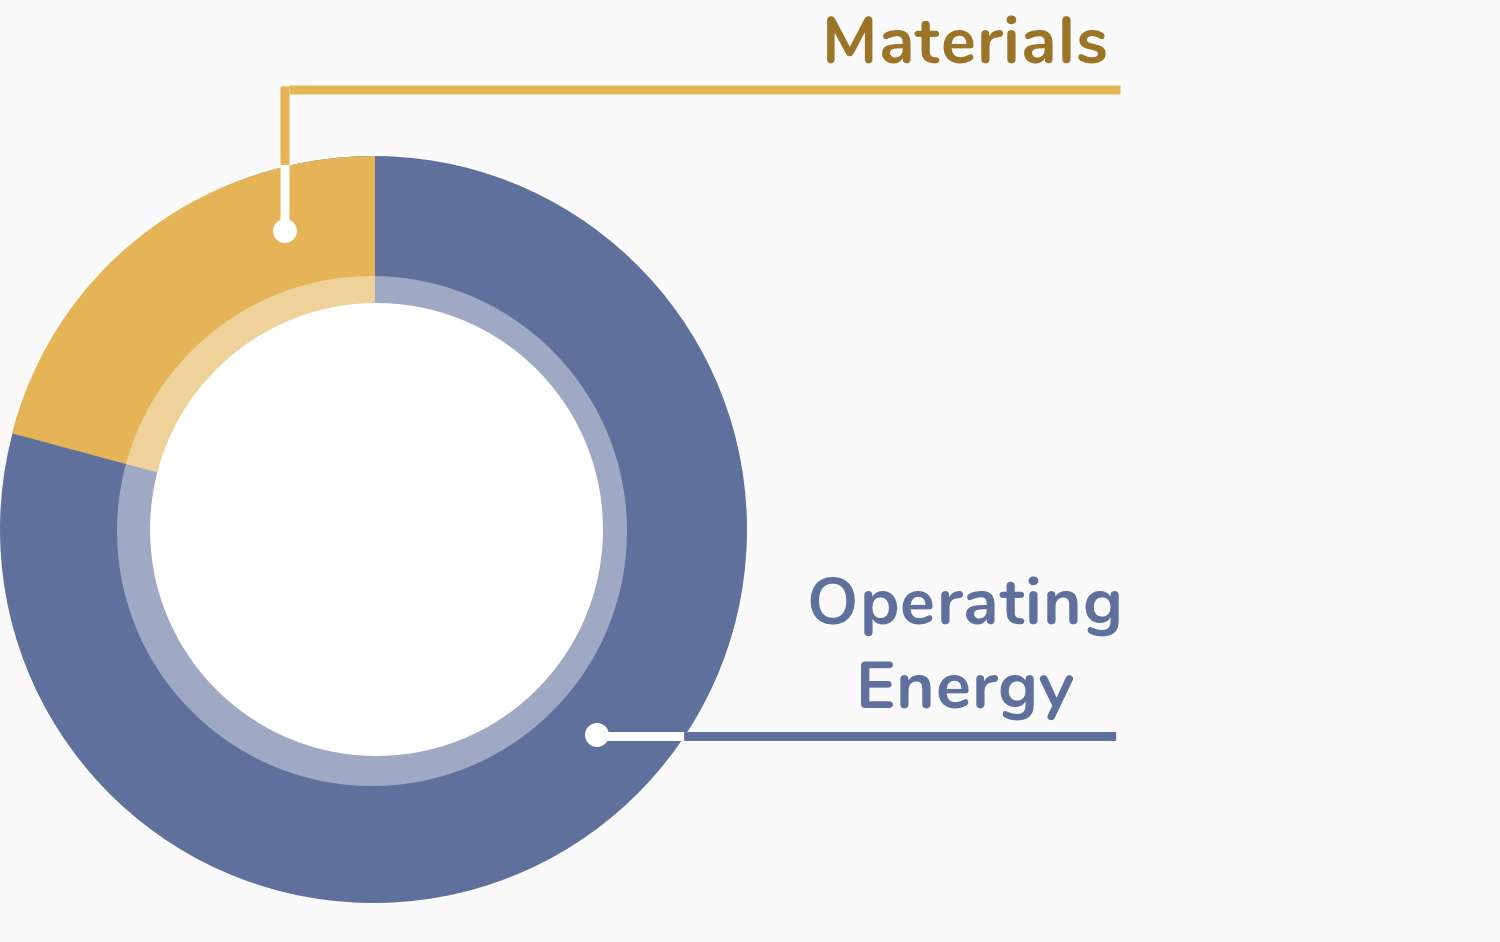 Graphs showing operating energy create much more ecological
            footprint than materials